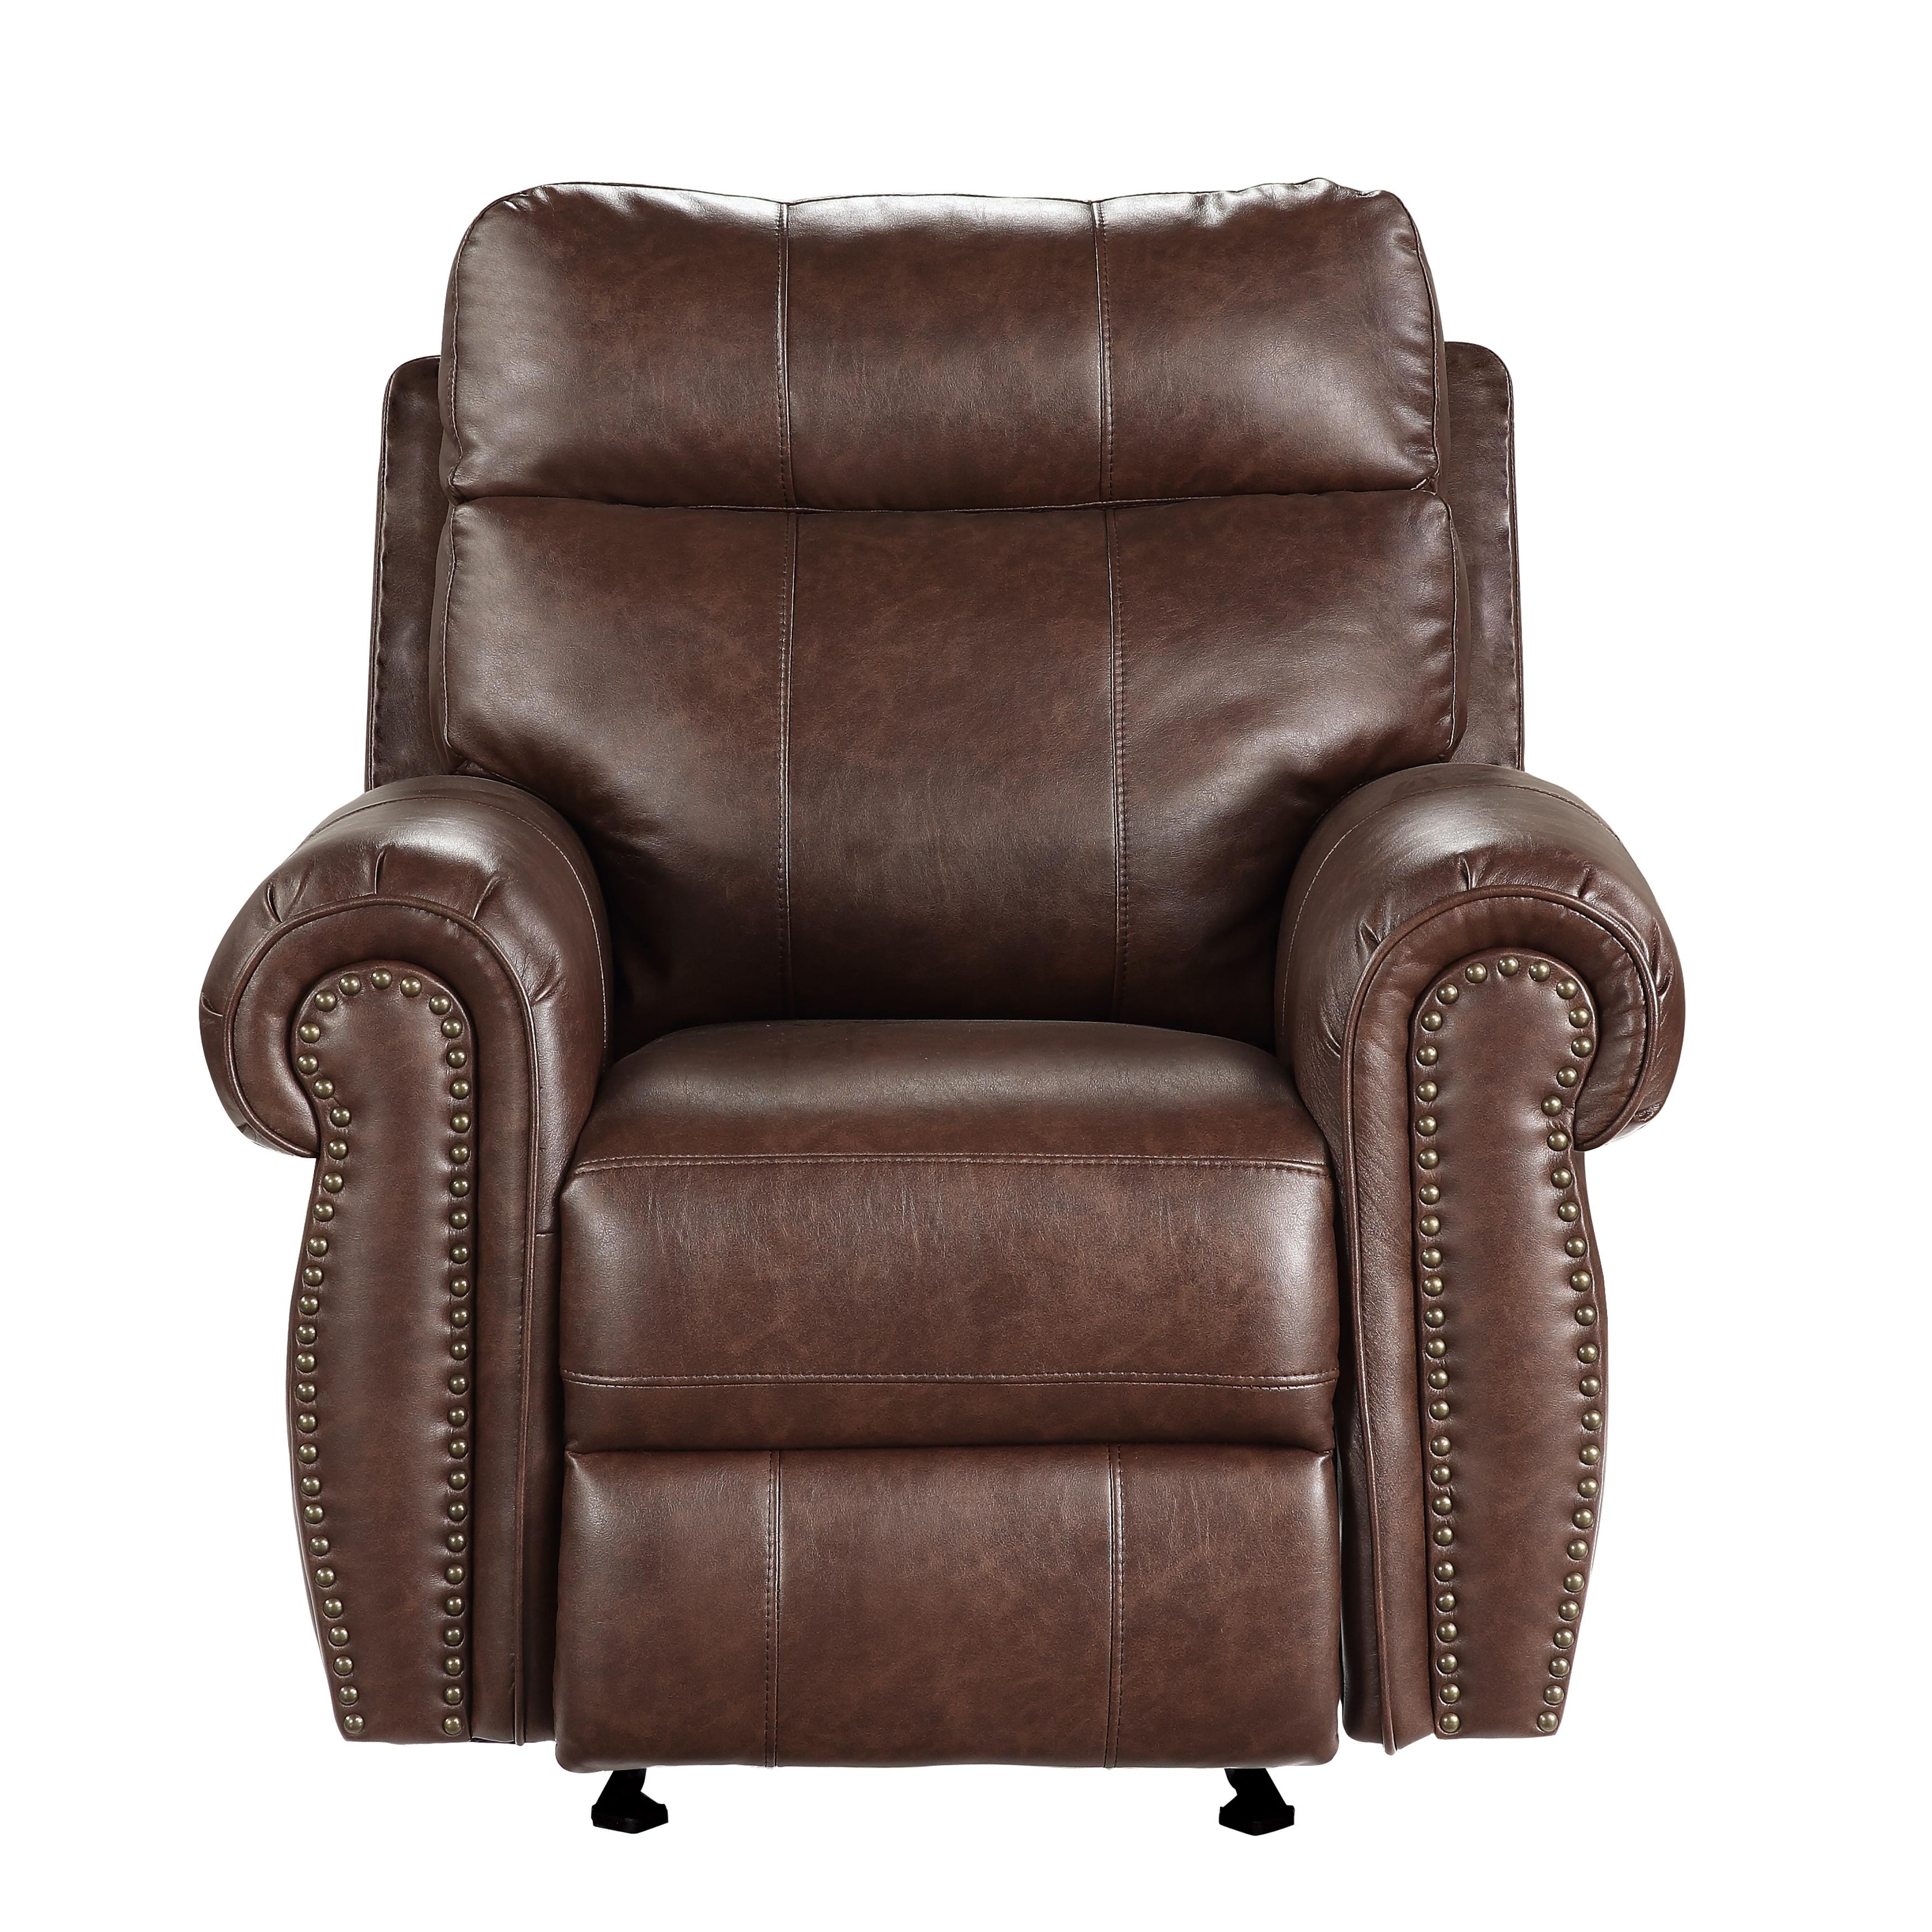 Transitional Reclining Chair 9488BR-1 Granville 9488BR-1 in Brown Microfiber